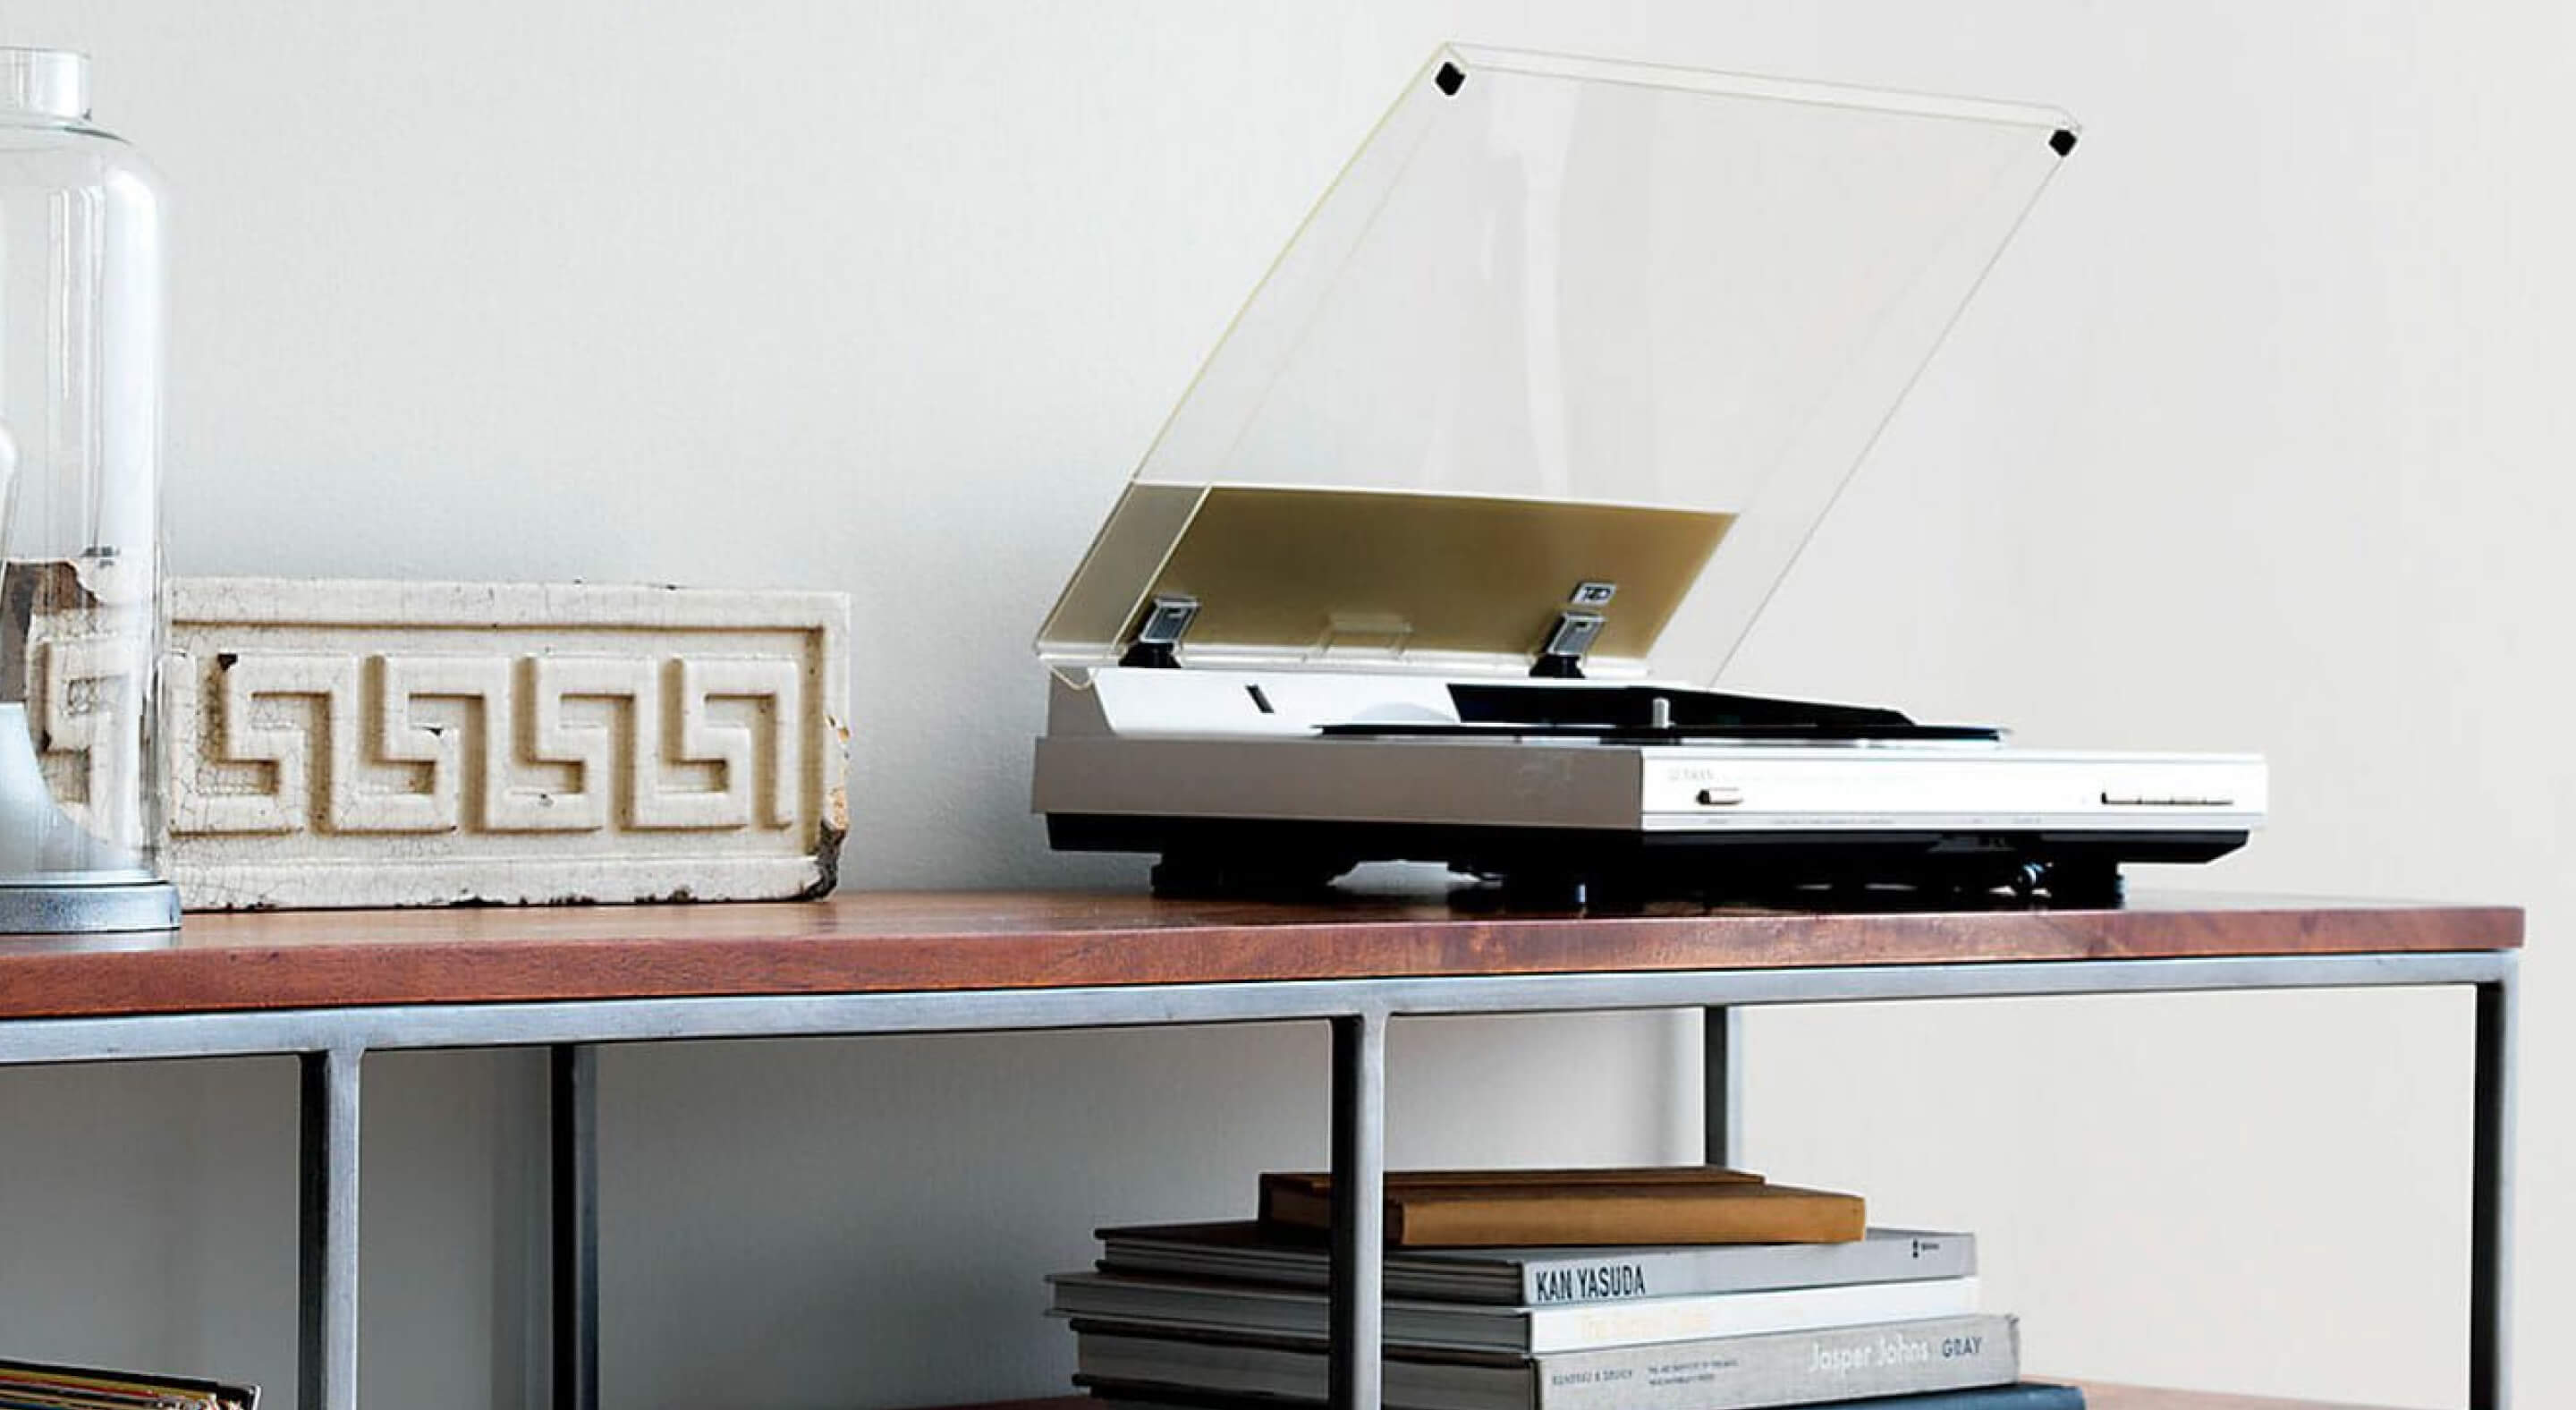 A record player on a piece of furiture